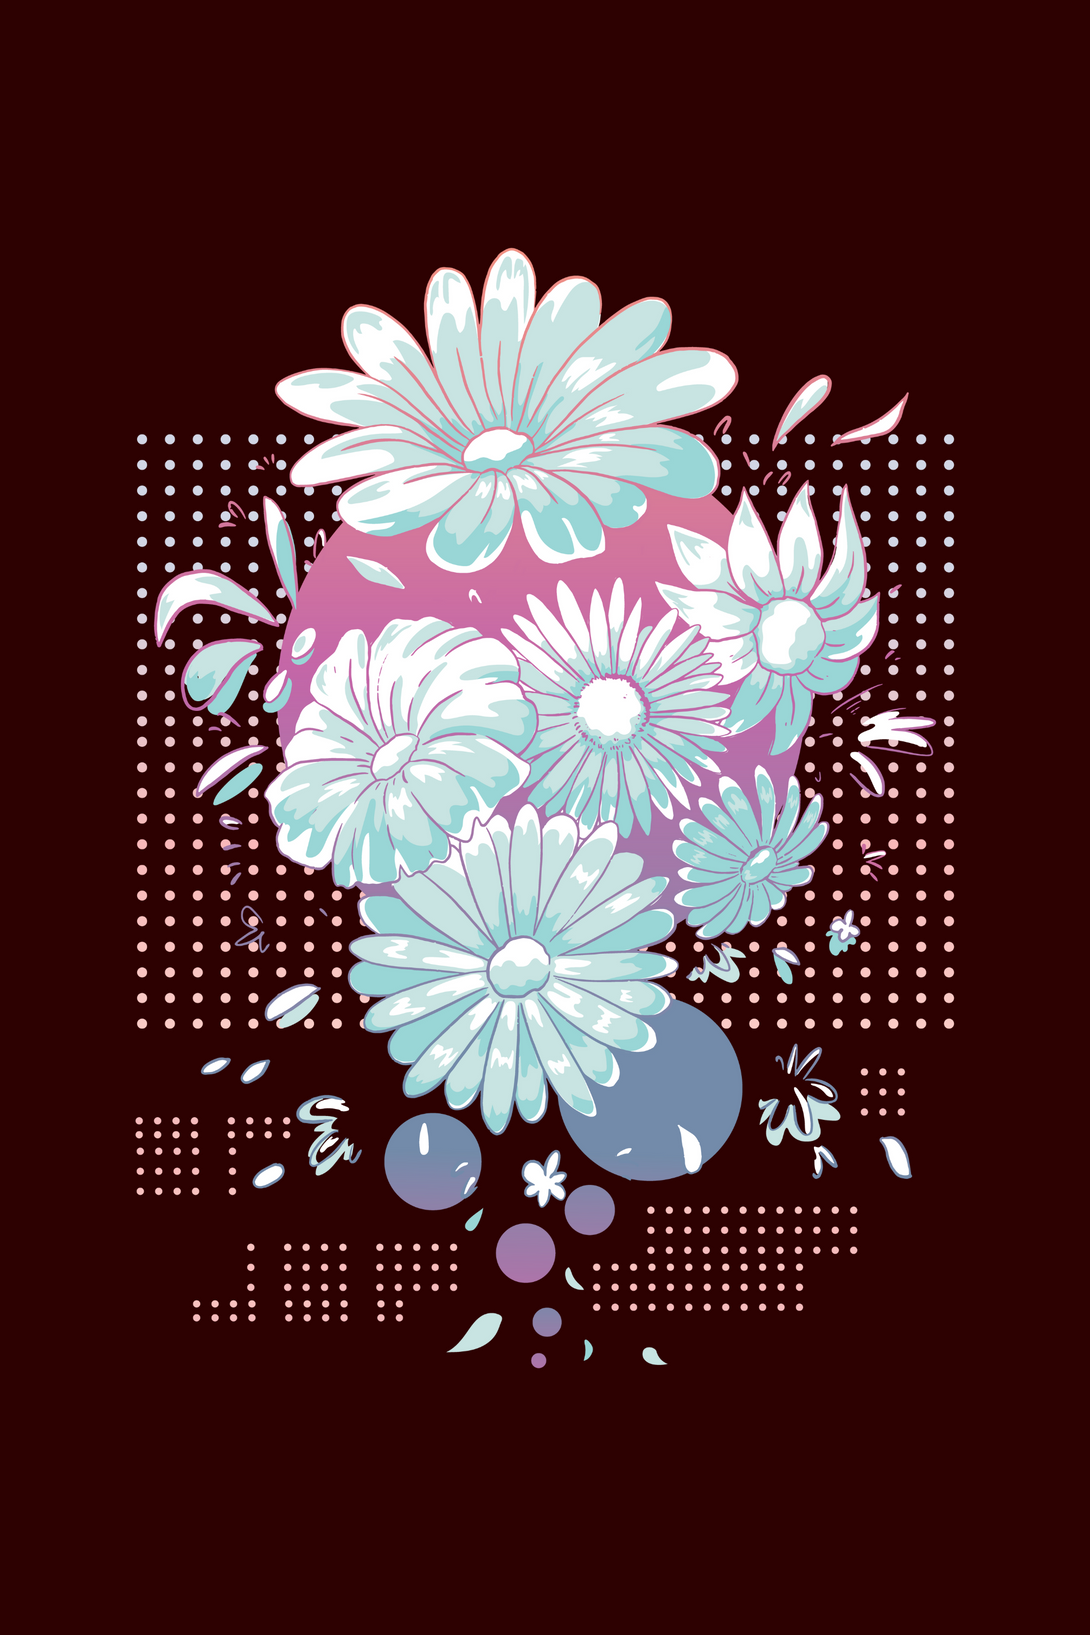 Daisy Delight Printed T-Shirt For Women - WowWaves - 1